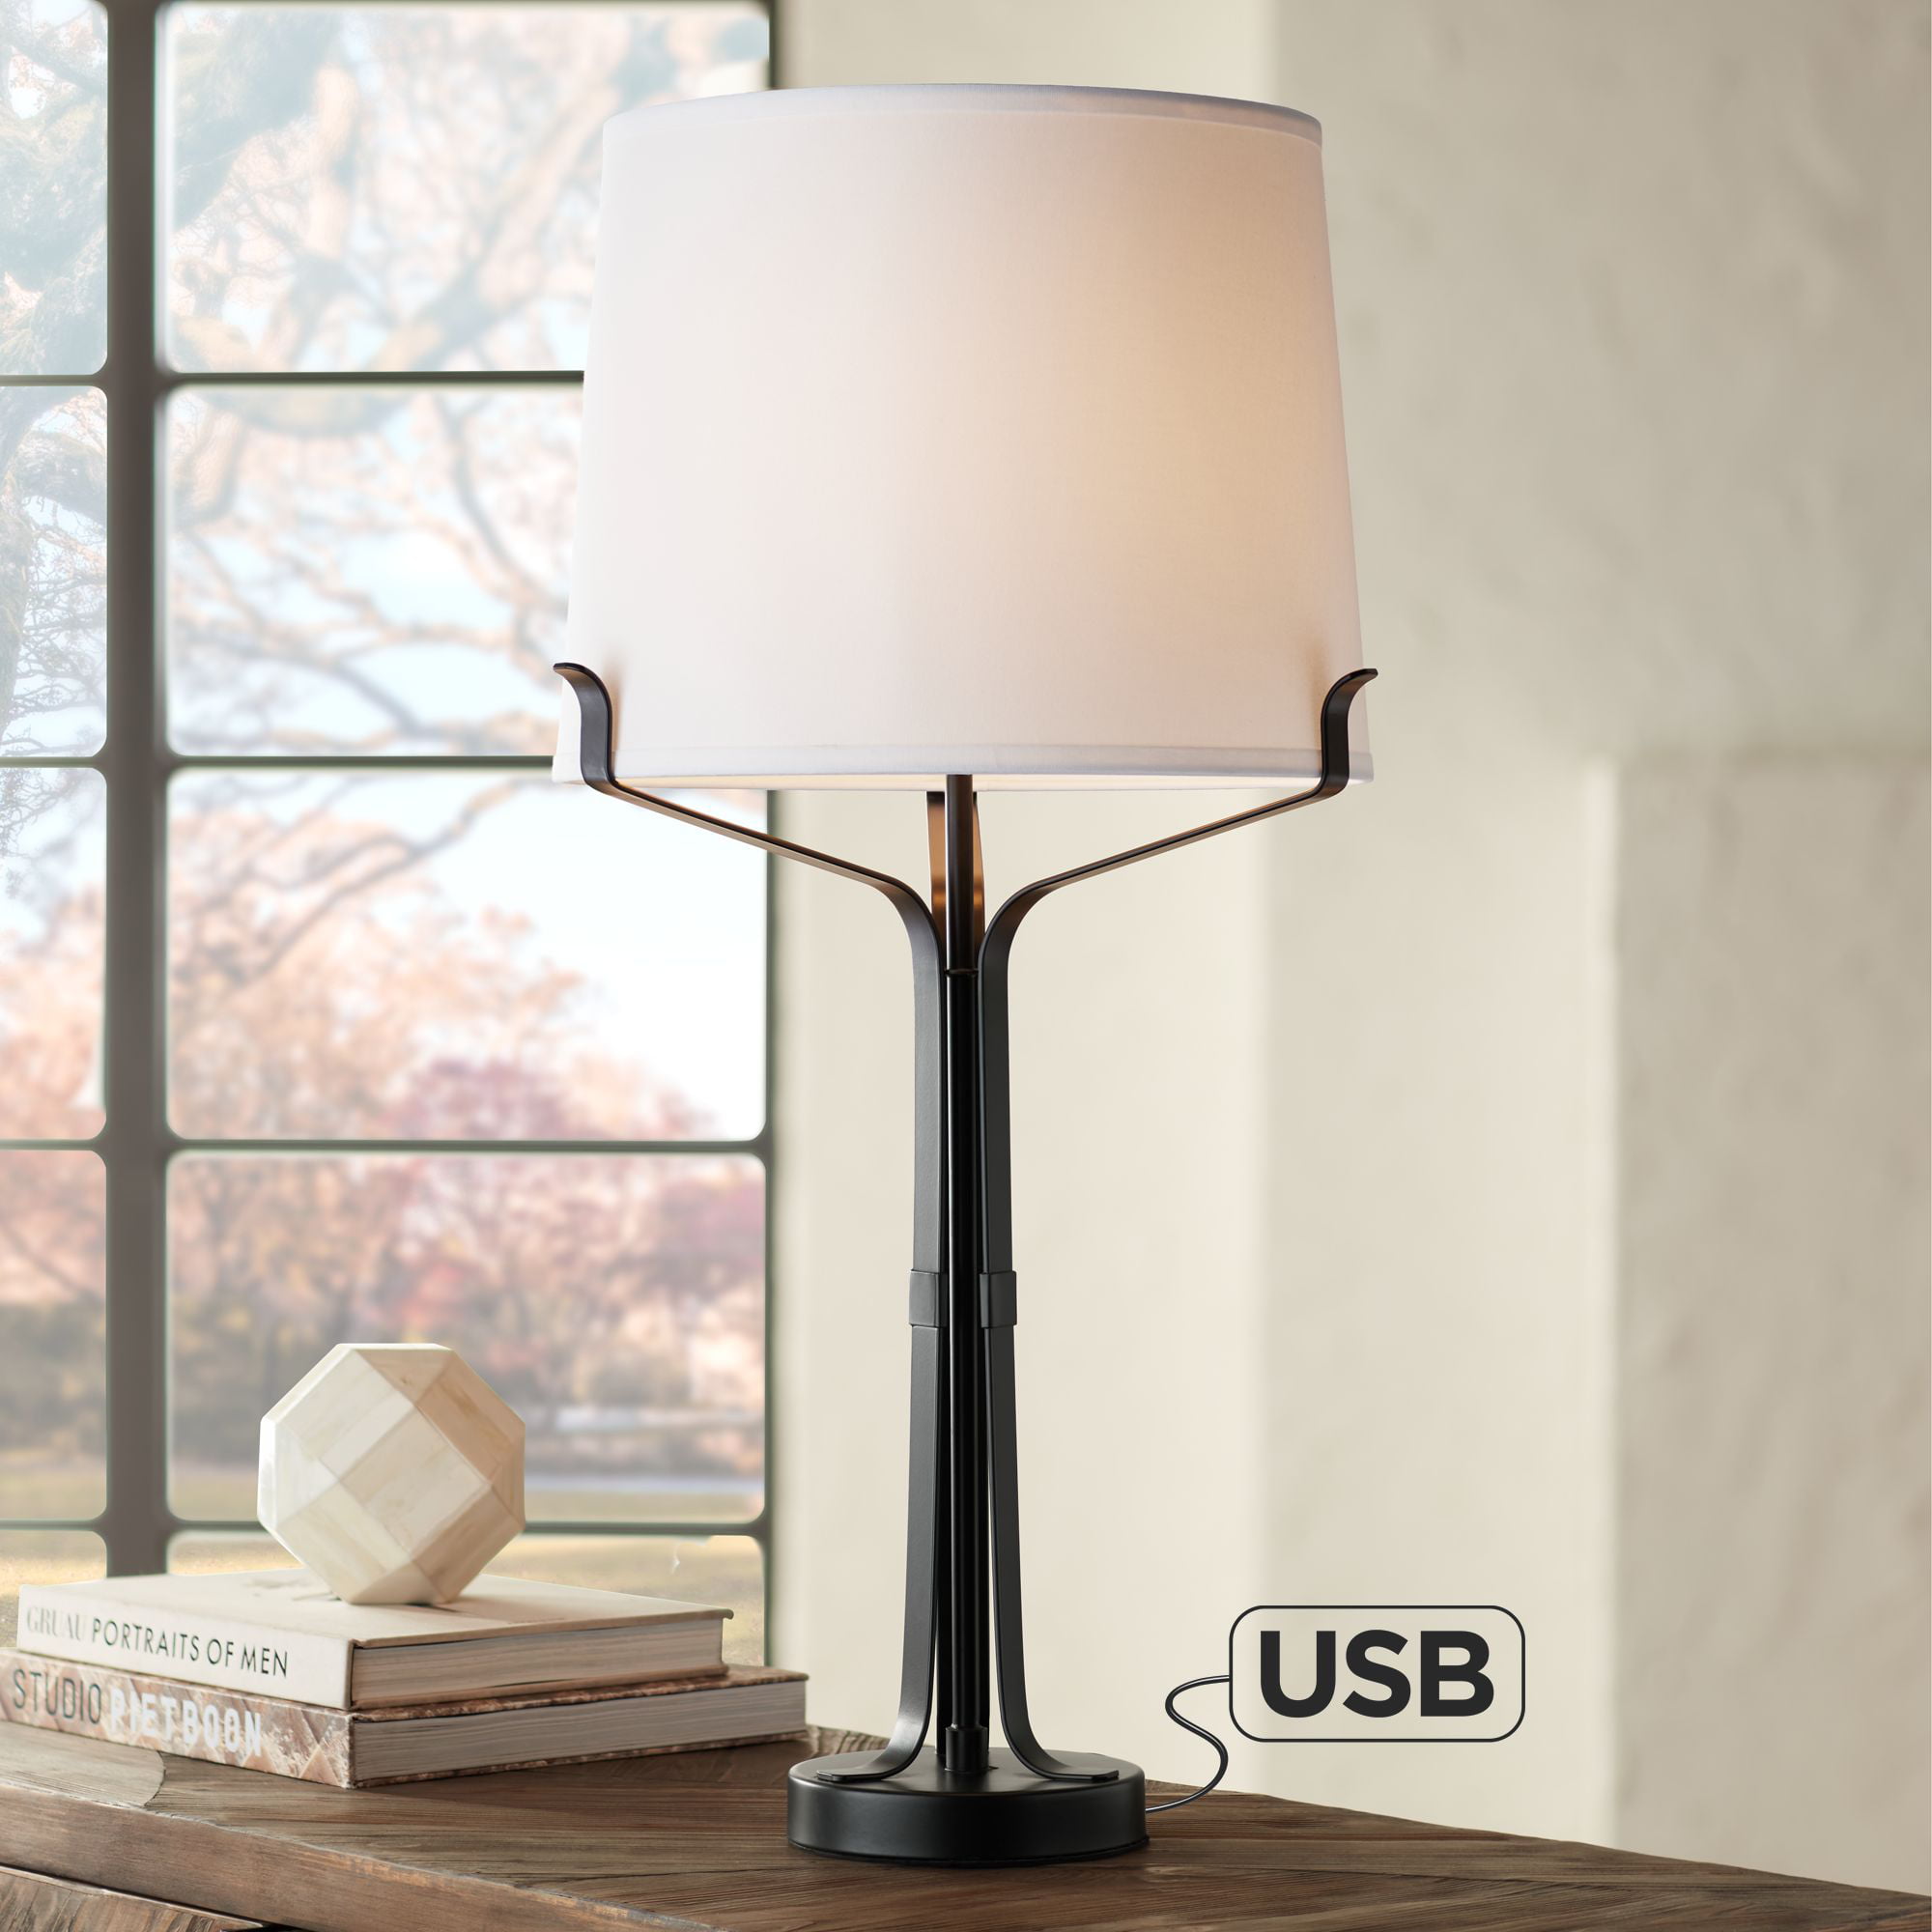 Modern Industrial Table Lamp, Franklin Iron Works Industrial Table Lamp With Usb Ports